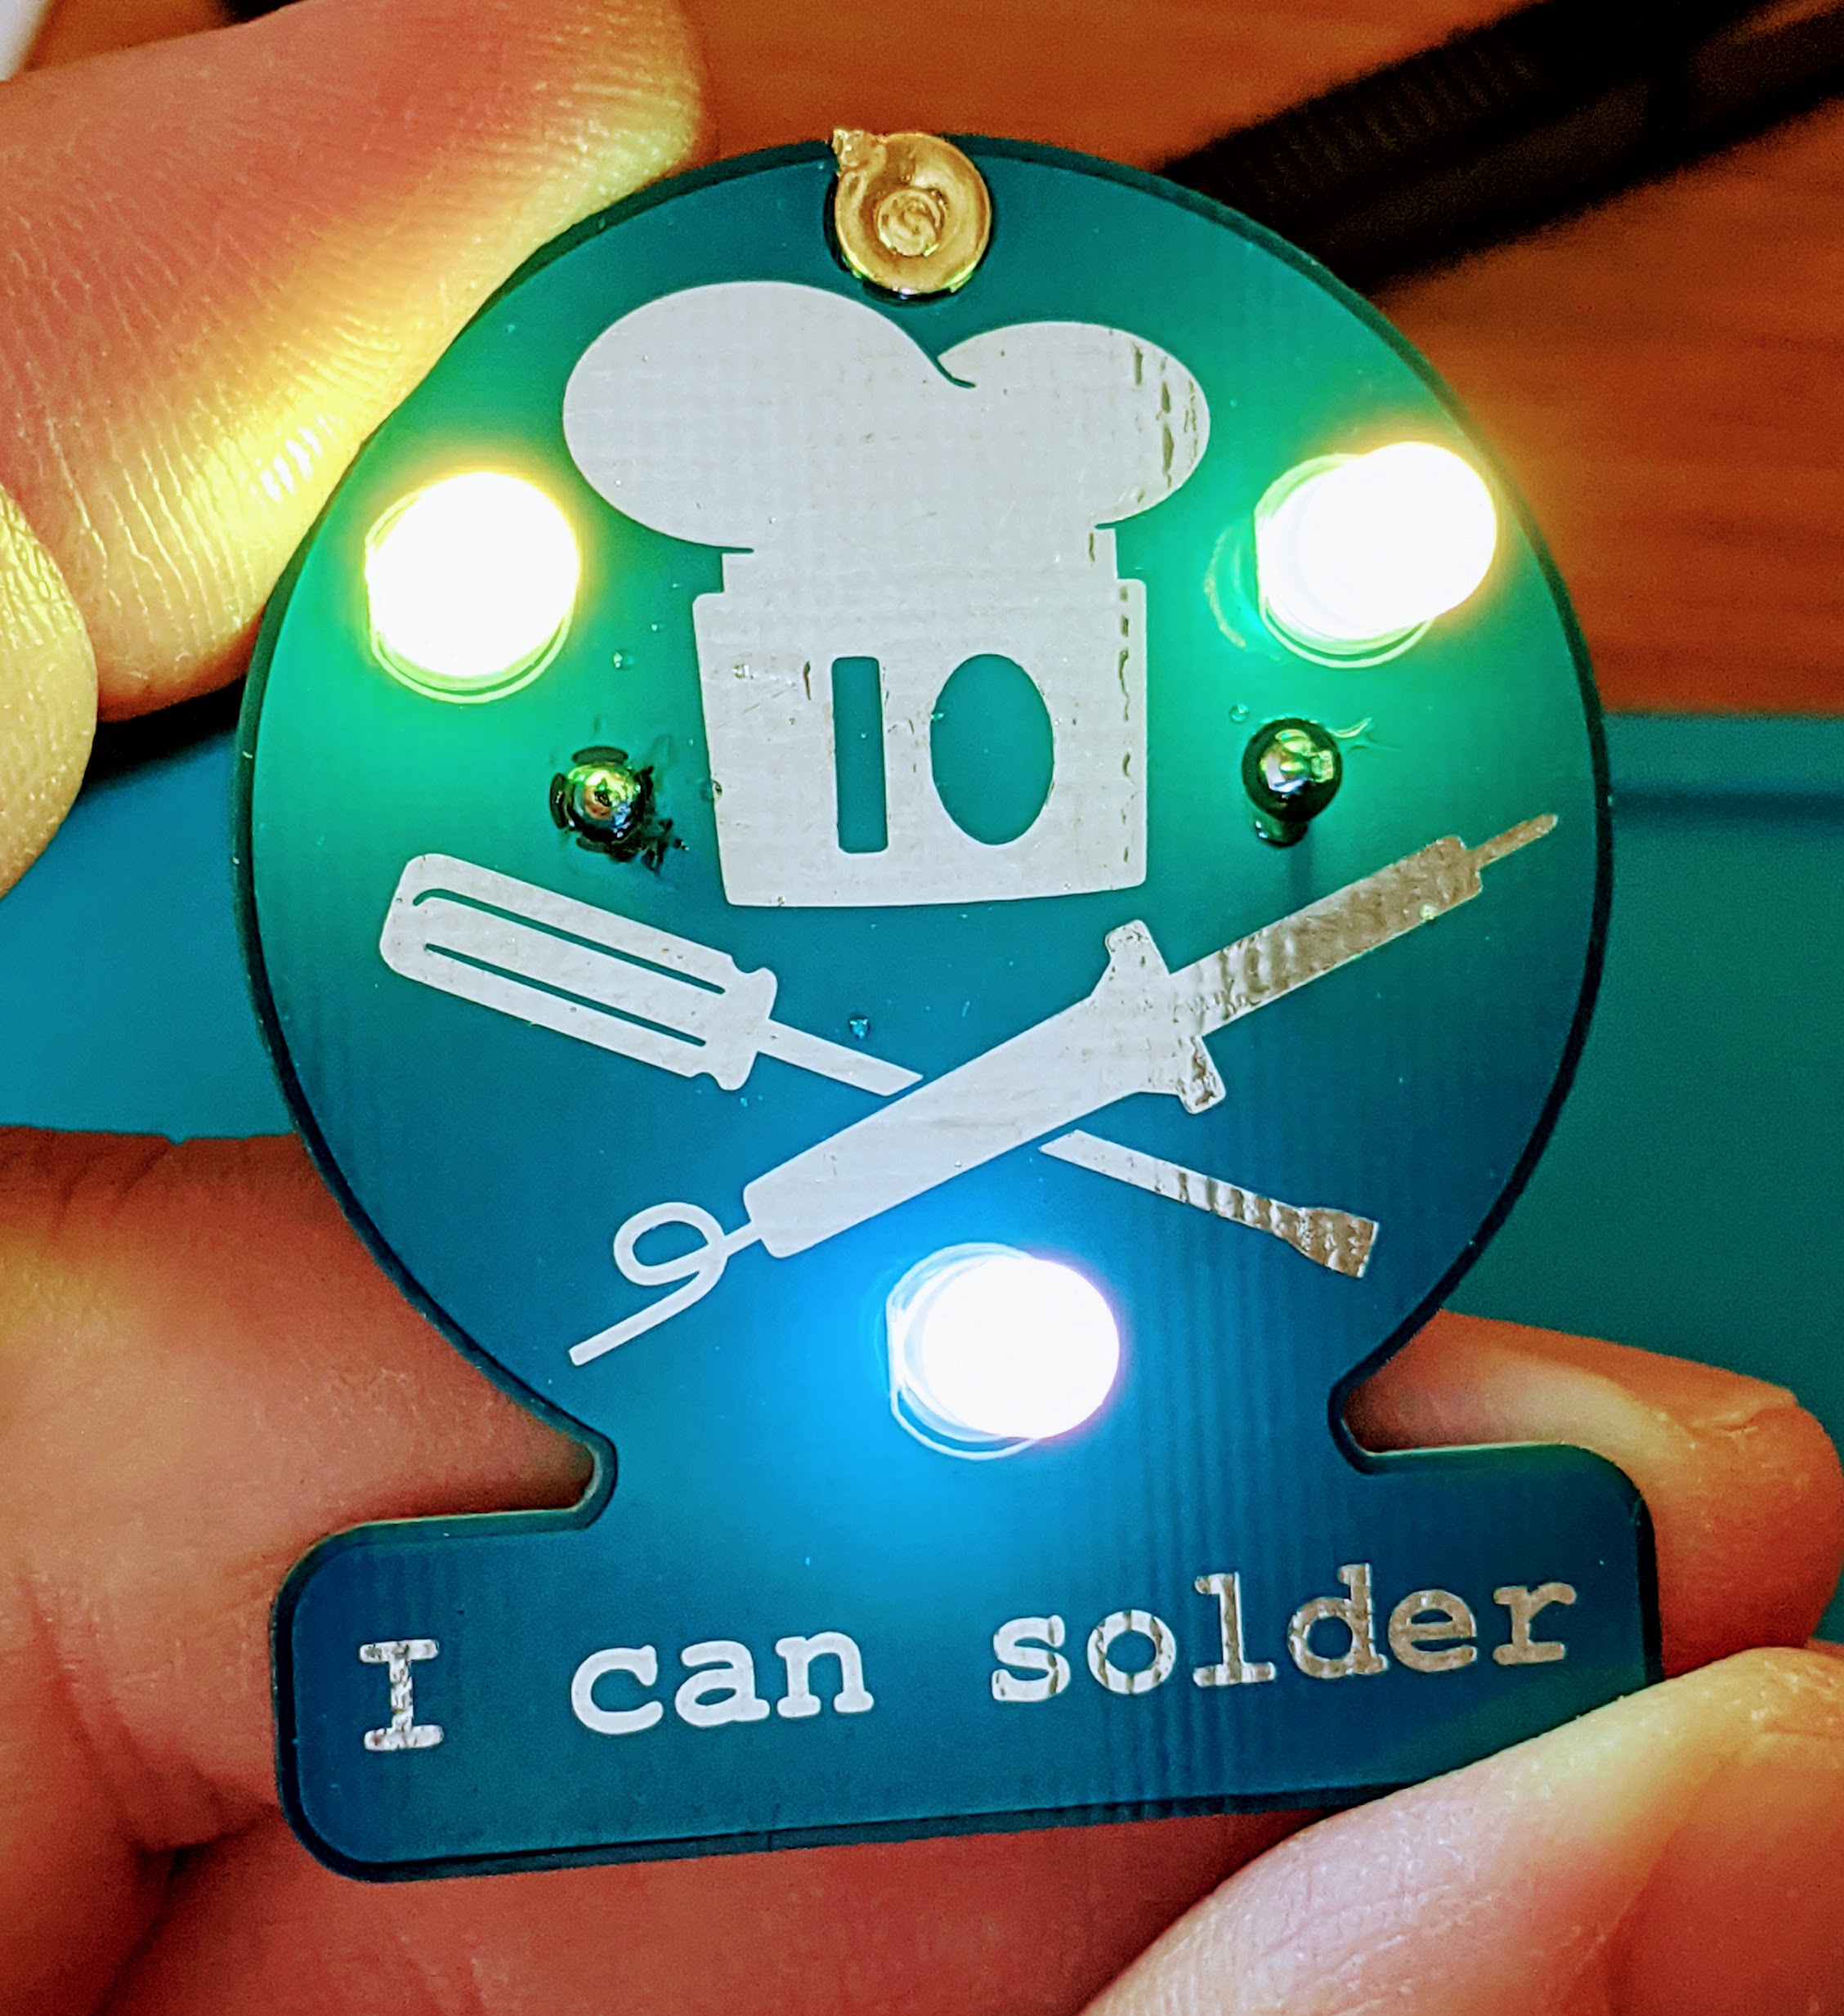 I can solder - This first soldering kit is suitable for everyone